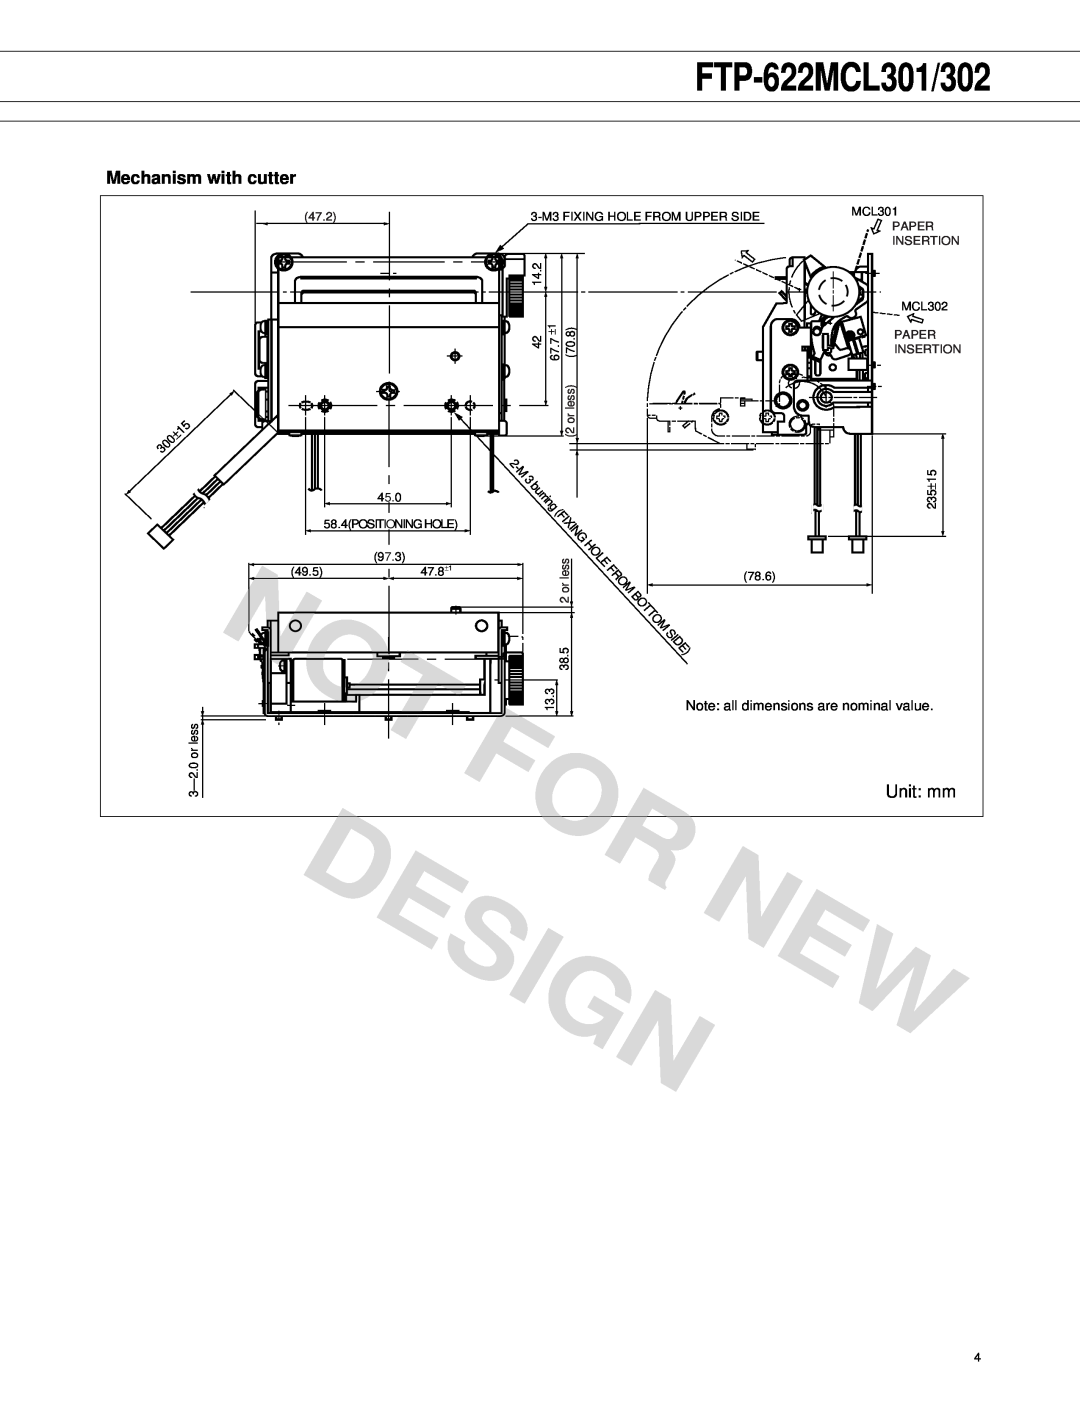 Fujitsu FTP-622MCL302 manual Design New, FTP-622MCL301/302, Note all dimensions are nominal value 